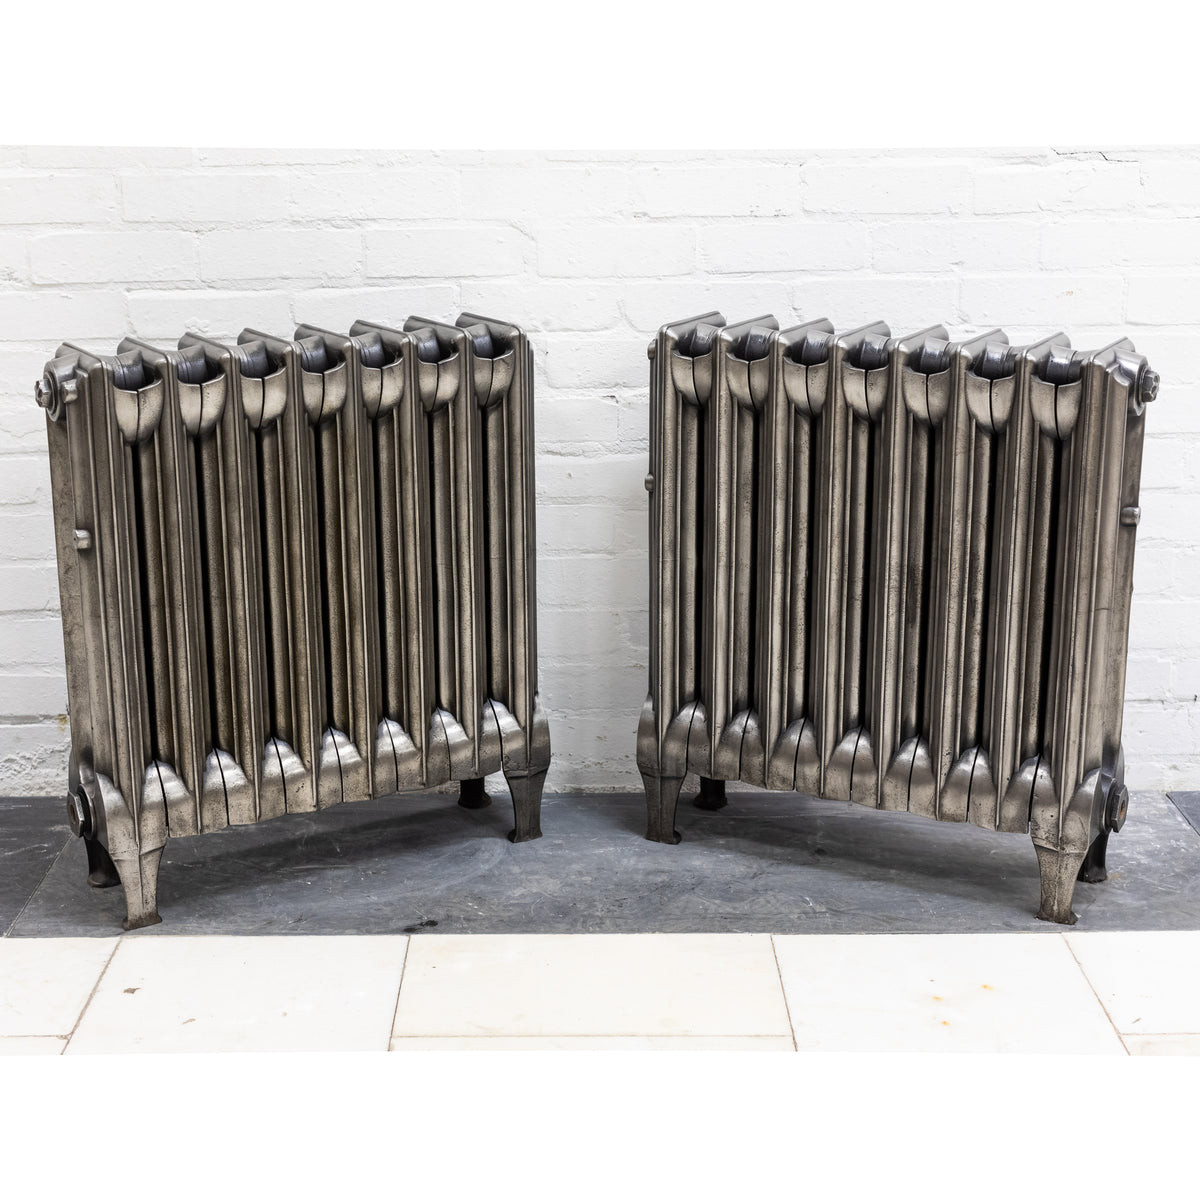 Rare Art Deco Cast Iron Radiator Reclaimed from Mercers Hall | 2 Avaliable | The Architectural Forum